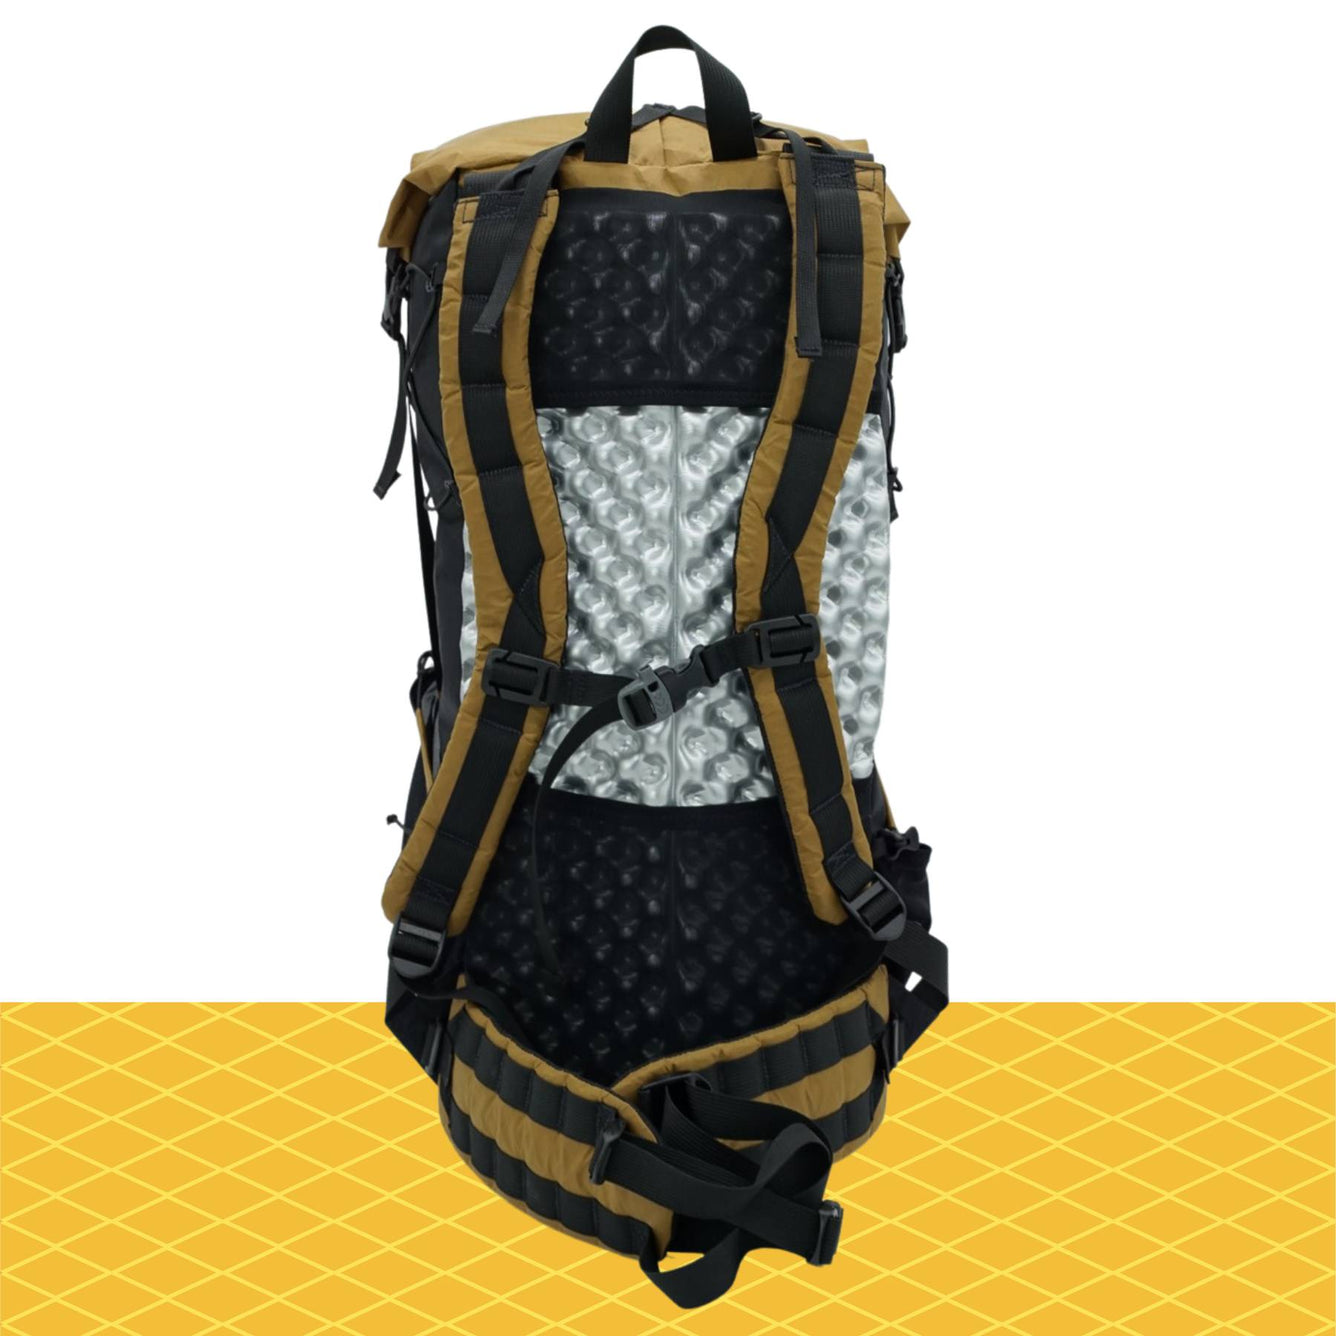 CTUG-25 DAY PACK